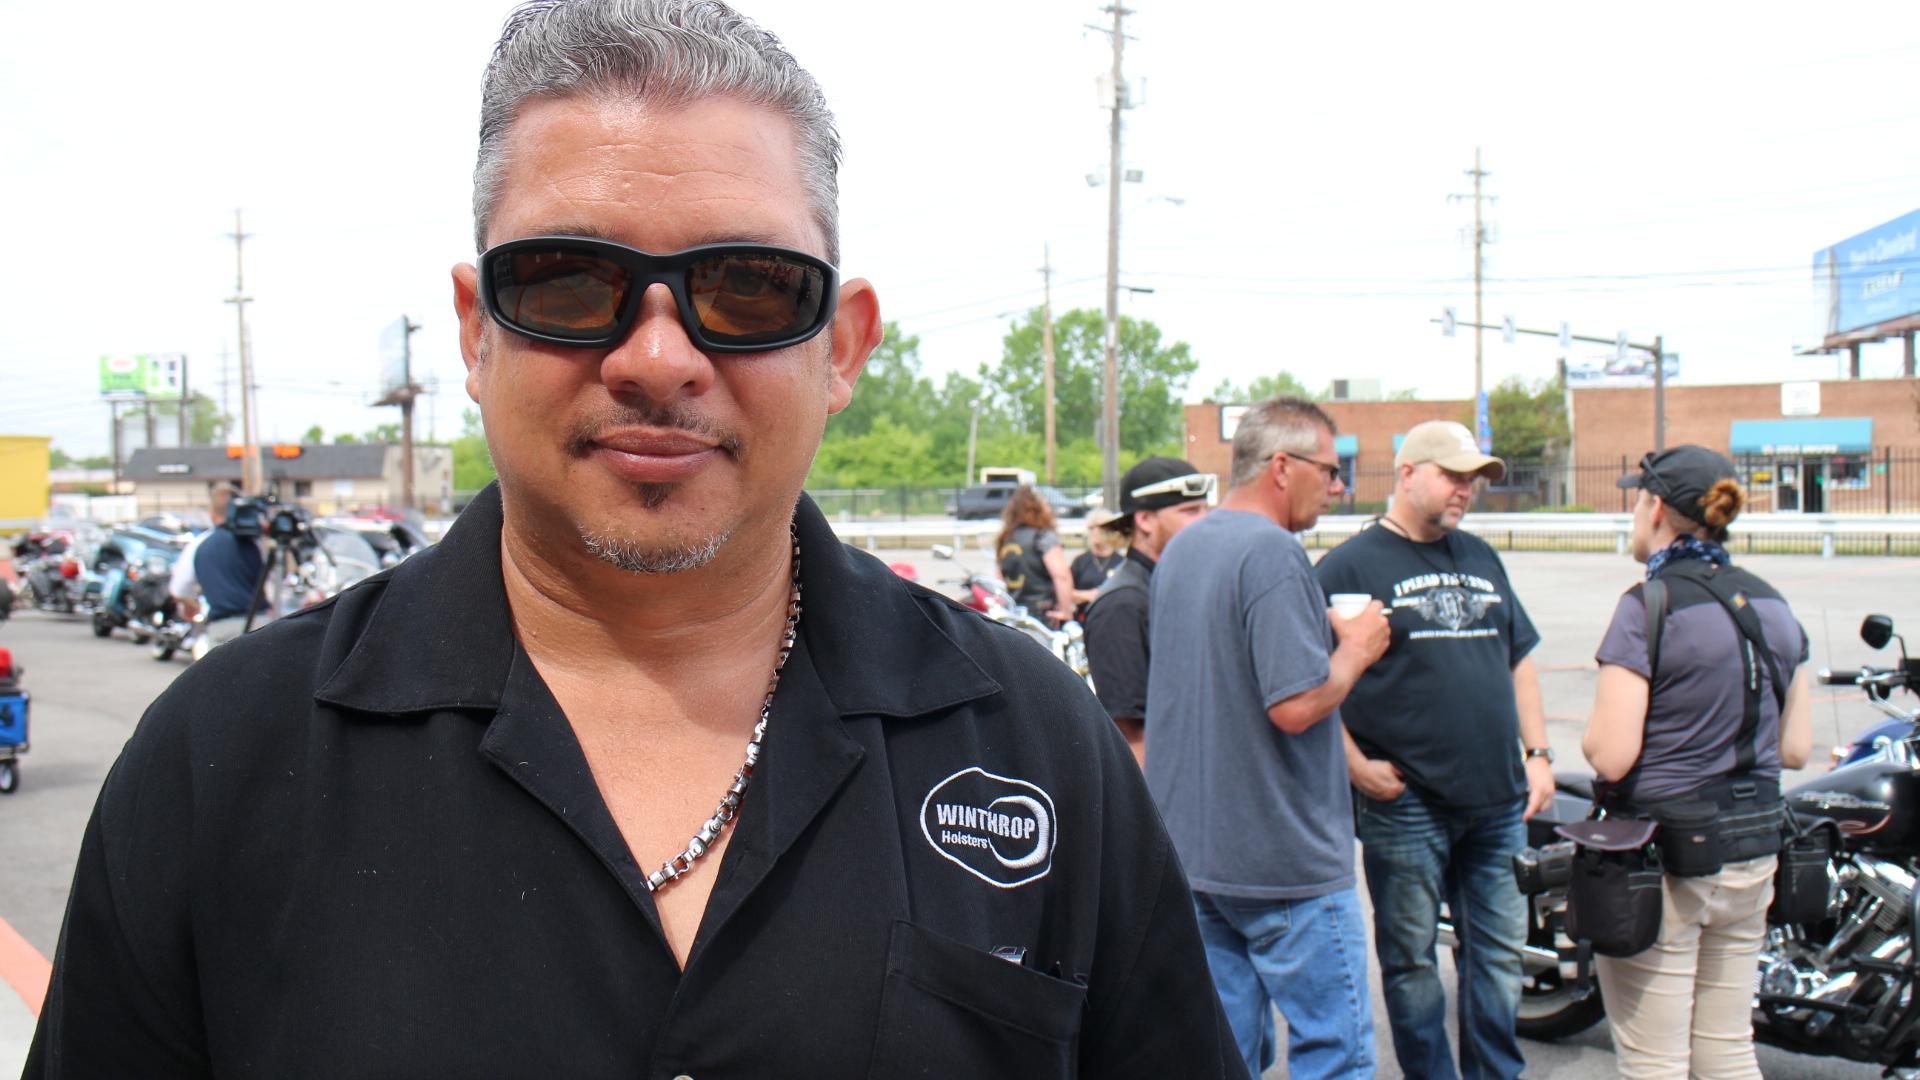 Winthrop Defreitas at the Bikers for Trump rally